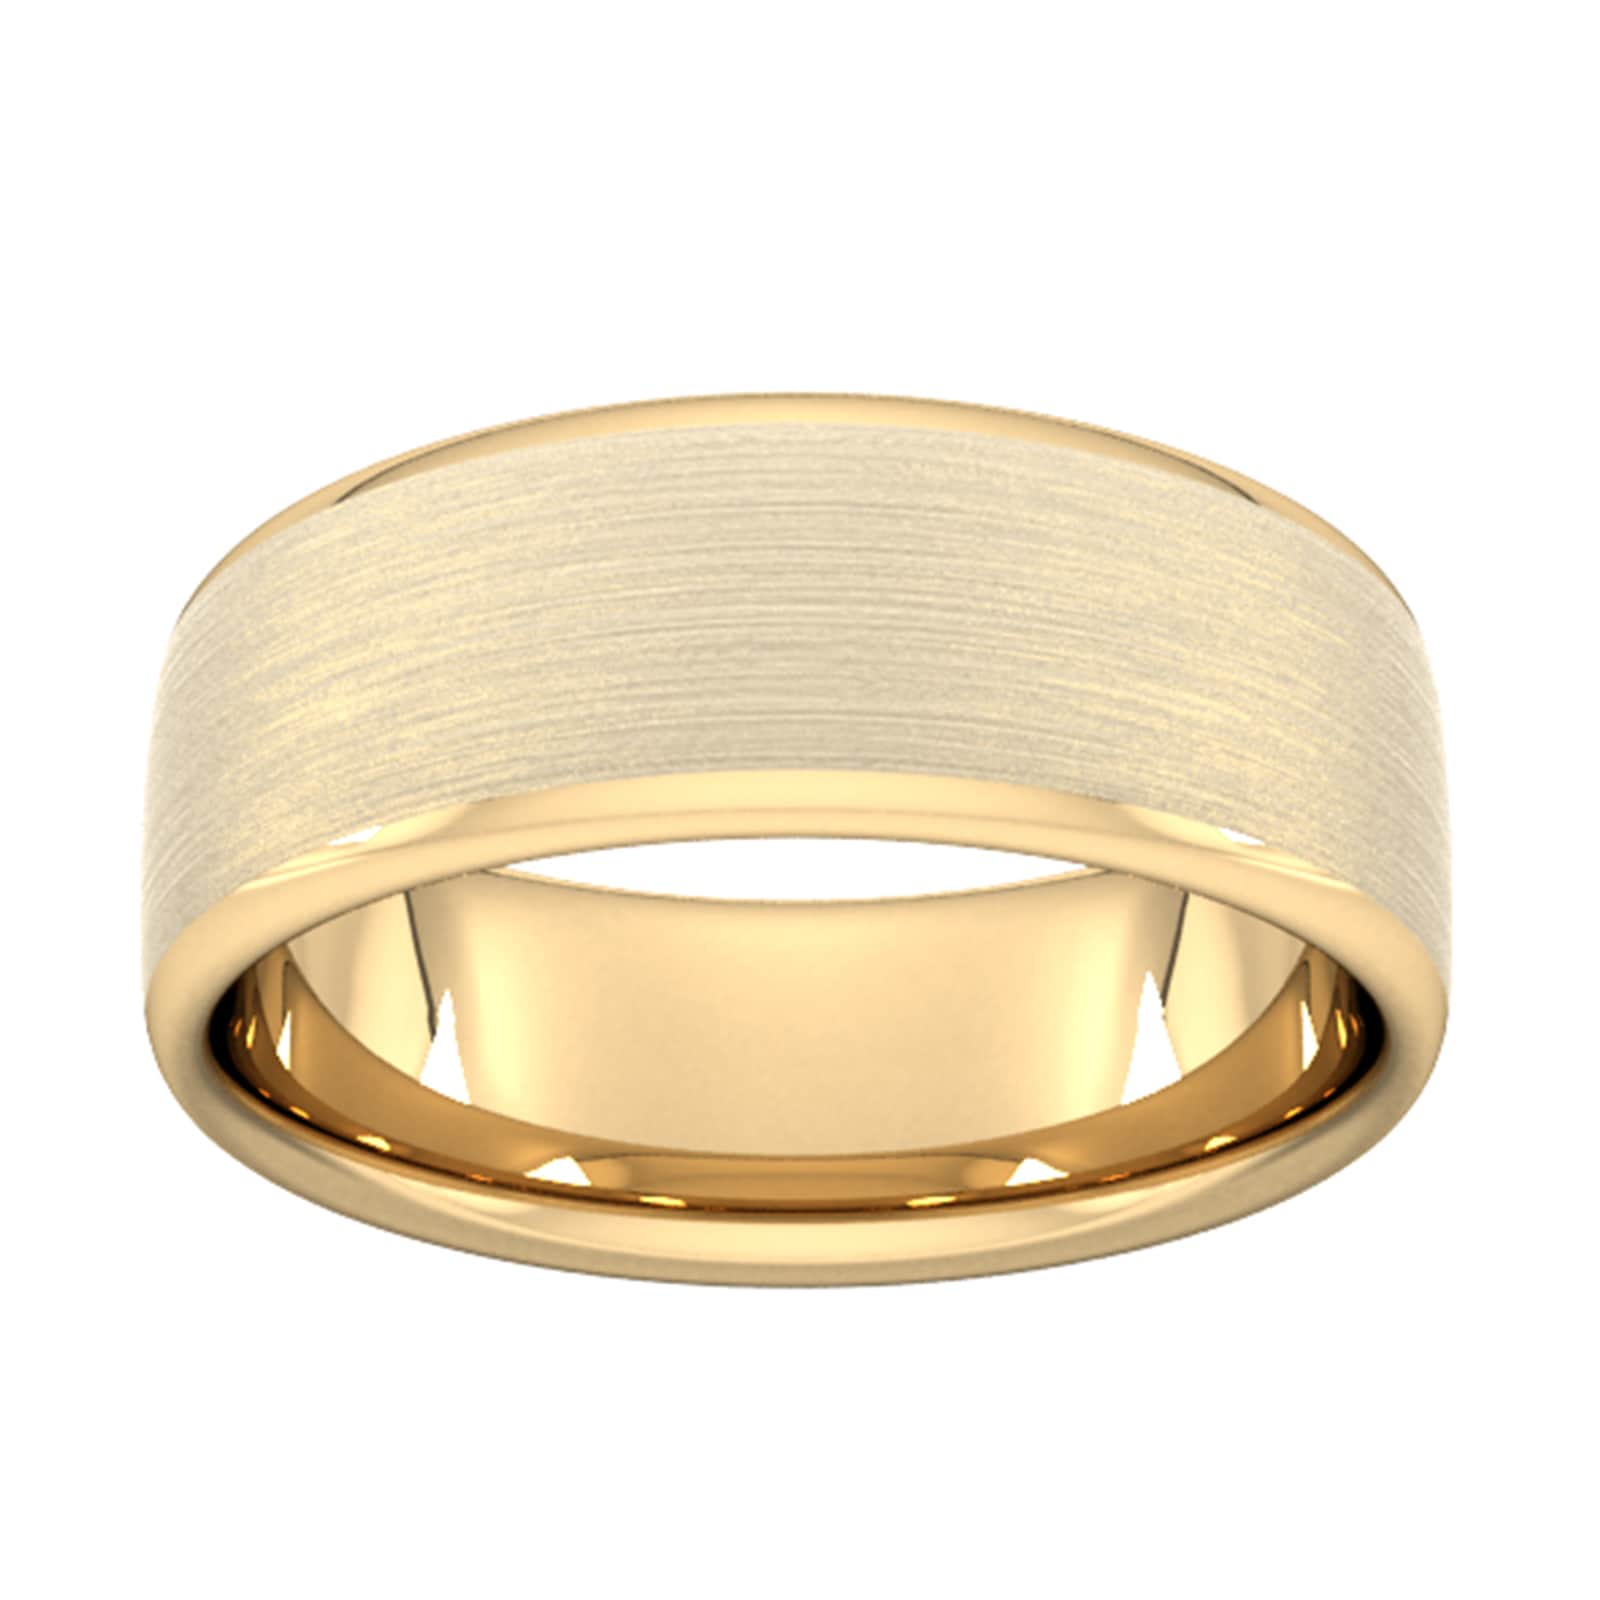 8mm Slight Court Extra Heavy Matt Finished Wedding Ring In 18 Carat Yellow Gold - Ring Size T